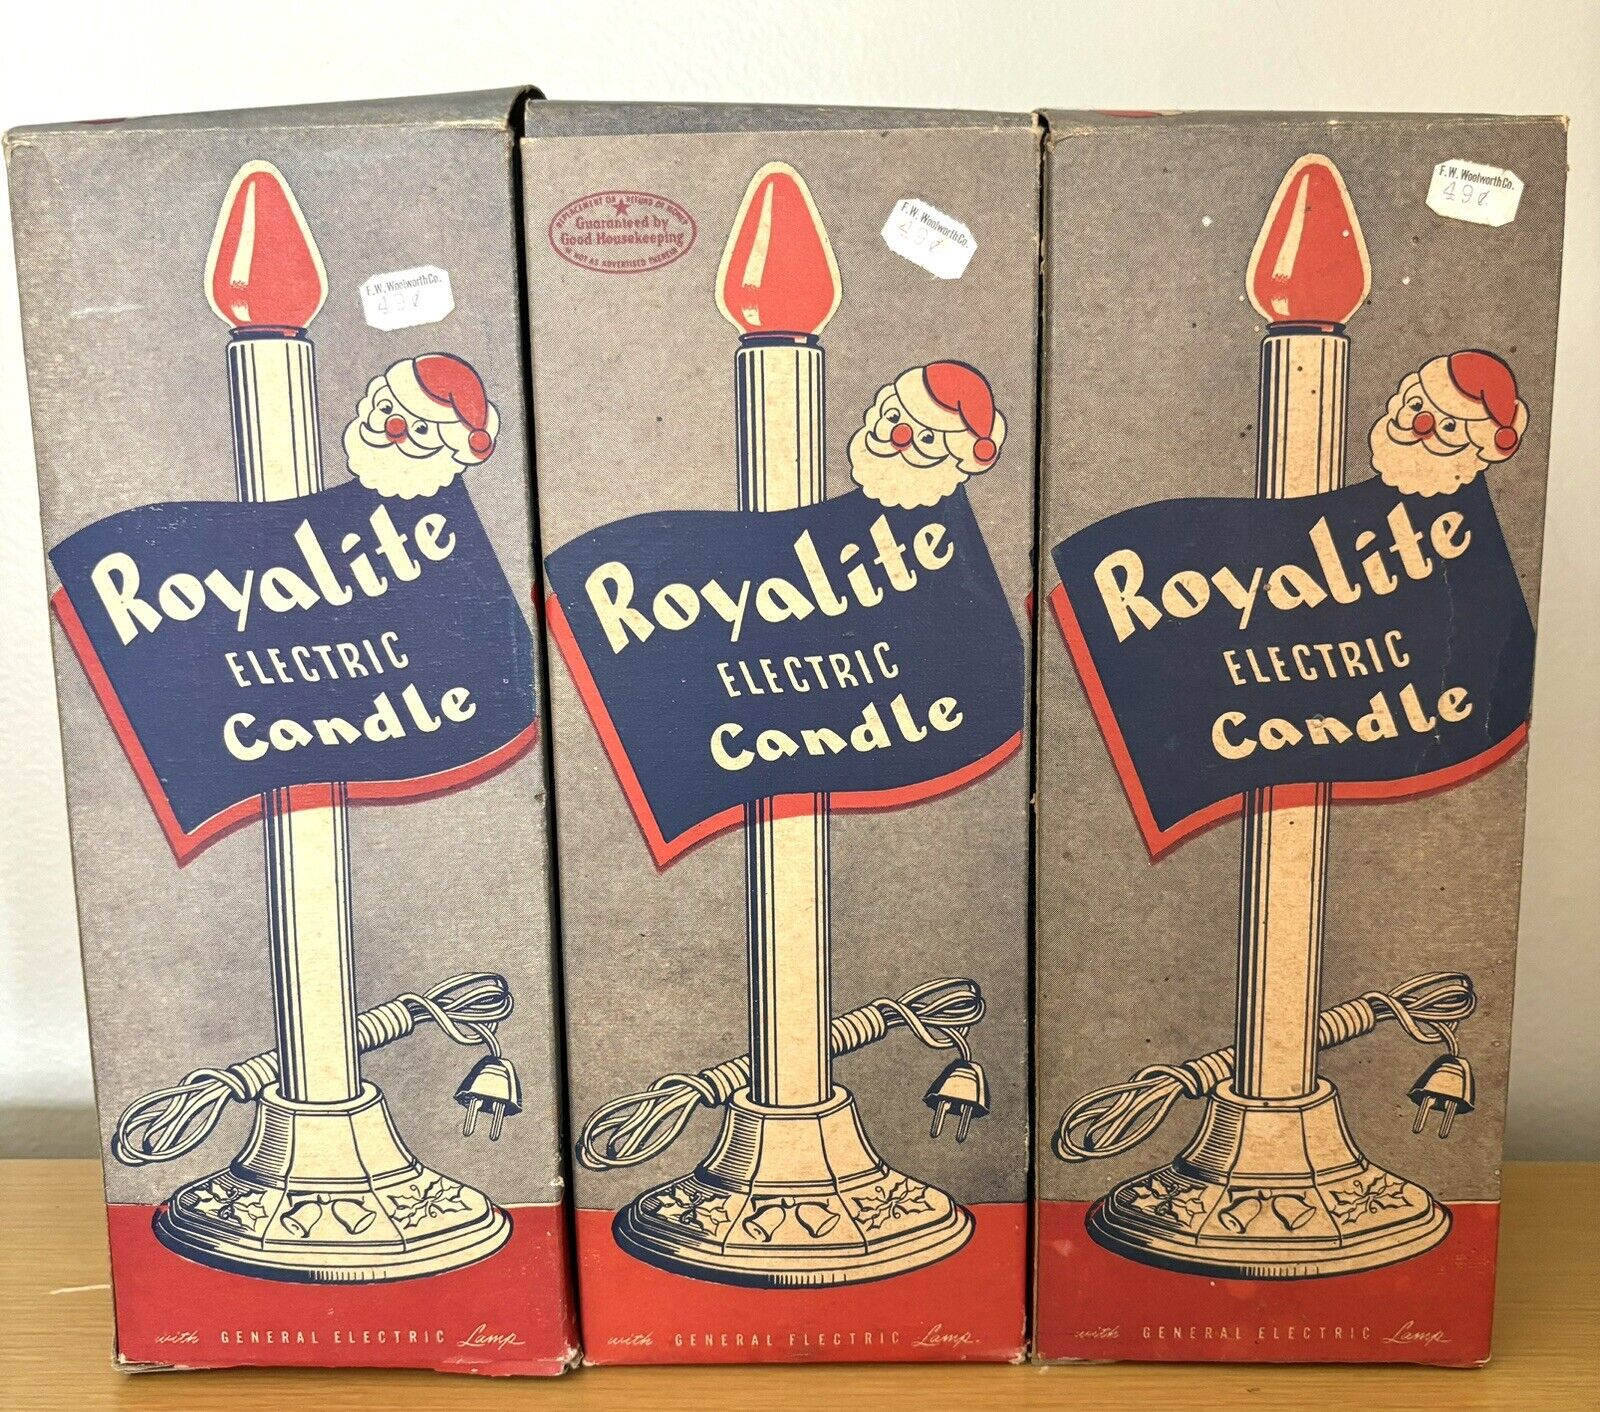 Vintage Christmas Royalite Electric Candle Set Of 3 In Original Boxes